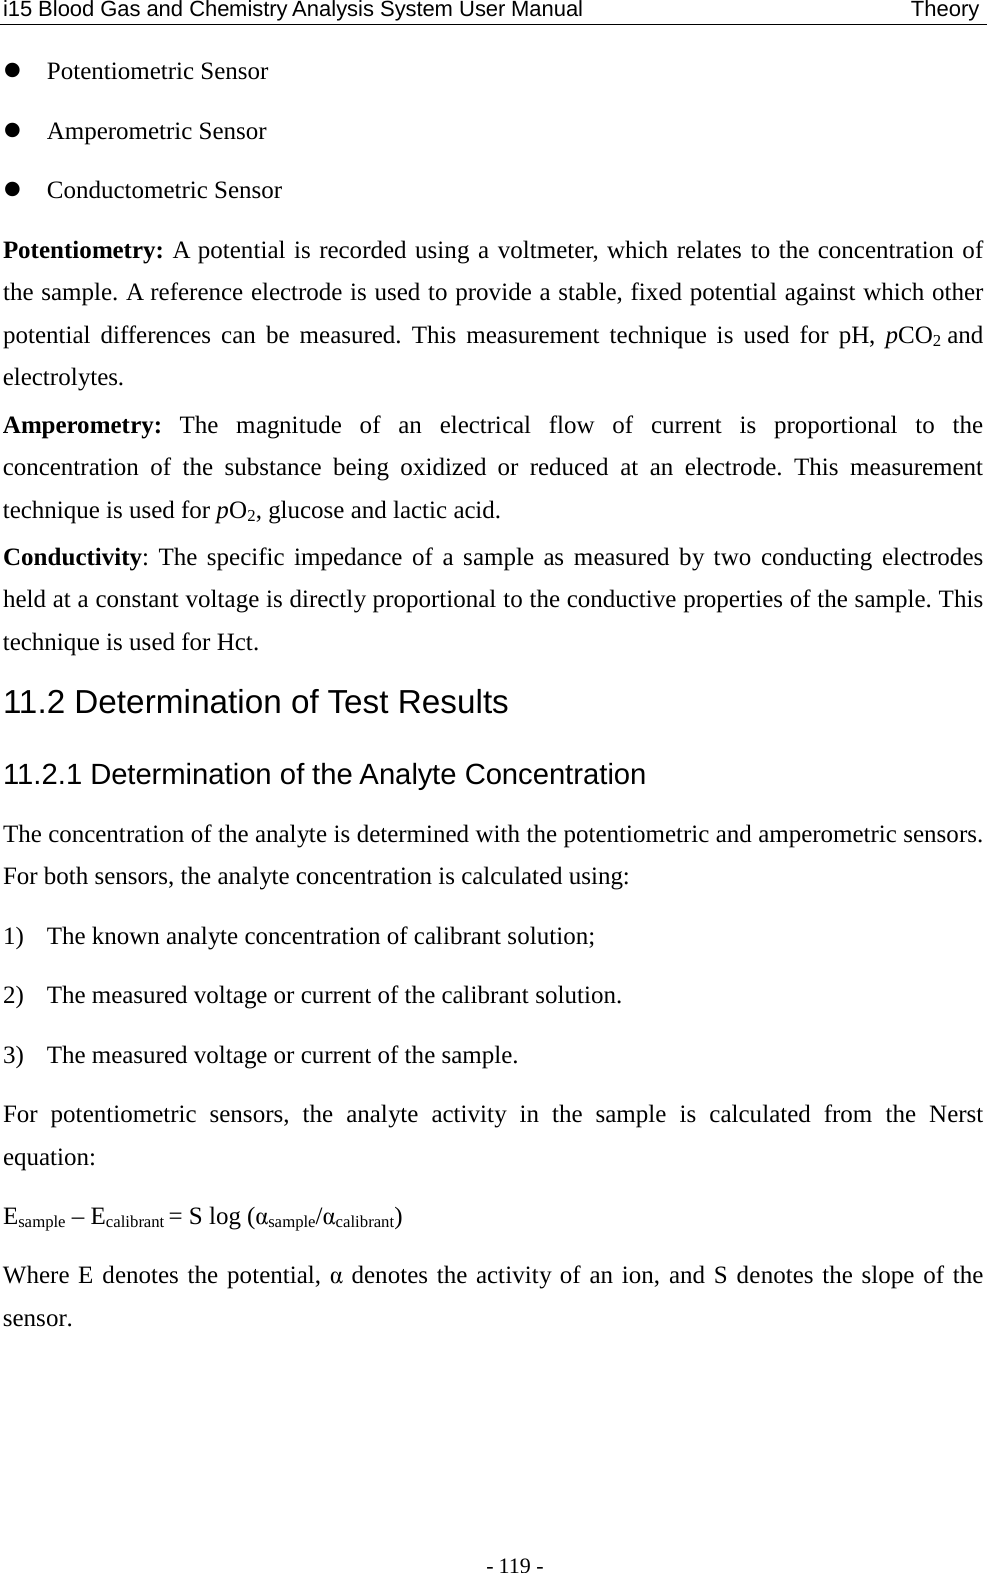 i15 Blood Gas and Chemistry Analysis System User Manual                                 Theory - 119 -  Potentiometric Sensor  Amperometric Sensor  Conductometric Sensor Potentiometry: A potential is recorded using a voltmeter, which relates to the concentration of the sample. A reference electrode is used to provide a stable, fixed potential against which other potential differences can be measured. This measurement technique is used for pH, pCO2 and electrolytes. Amperometry: The magnitude of an electrical flow of current is proportional to the concentration of the substance being oxidized or reduced at an electrode. This measurement technique is used for pO2, glucose and lactic acid. Conductivity: The specific impedance of a sample as measured by two conducting electrodes held at a constant voltage is directly proportional to the conductive properties of the sample. This technique is used for Hct. 11.2 Determination of Test Results 11.2.1 Determination of the Analyte Concentration The concentration of the analyte is determined with the potentiometric and amperometric sensors. For both sensors, the analyte concentration is calculated using: 1) The known analyte concentration of calibrant solution; 2) The measured voltage or current of the calibrant solution. 3) The measured voltage or current of the sample. For potentiometric sensors, the analyte activity in the sample is calculated from the Nerst equation: Esample – Ecalibrant = S log (αsample/αcalibrant) Where E denotes the potential, α denotes the activity of an ion, and S denotes the slope of the sensor.   